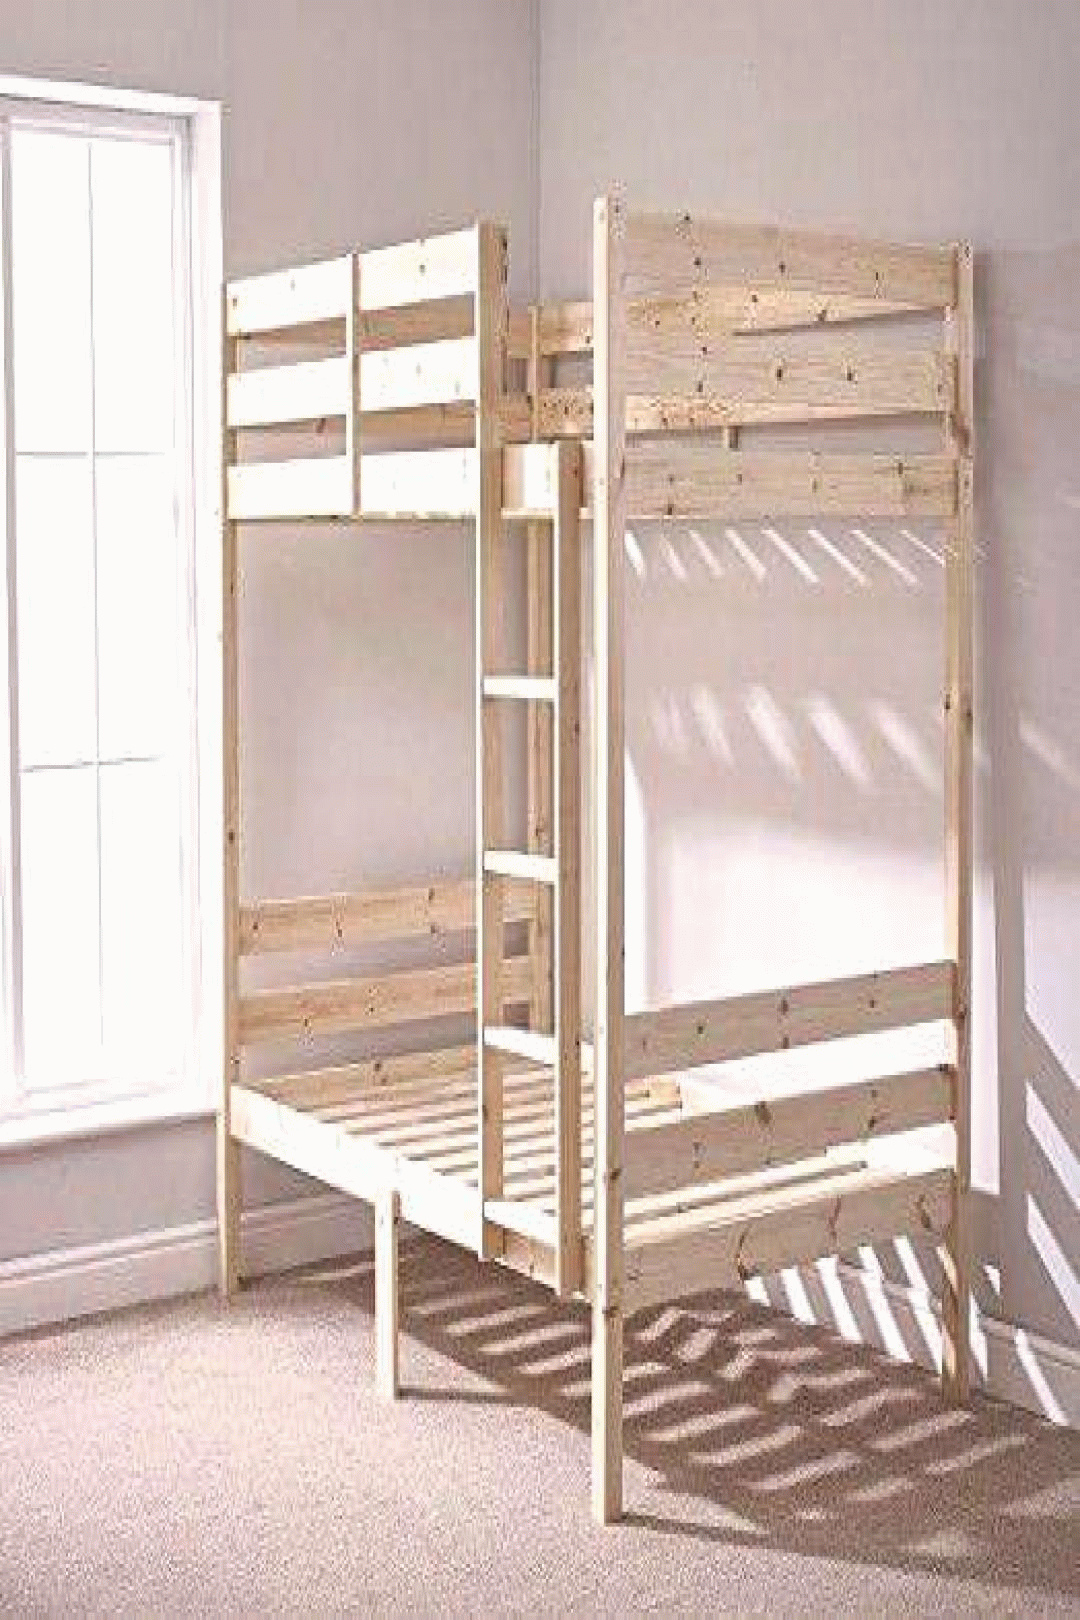 The benefits of bunk beds with storage and a guide to buying them